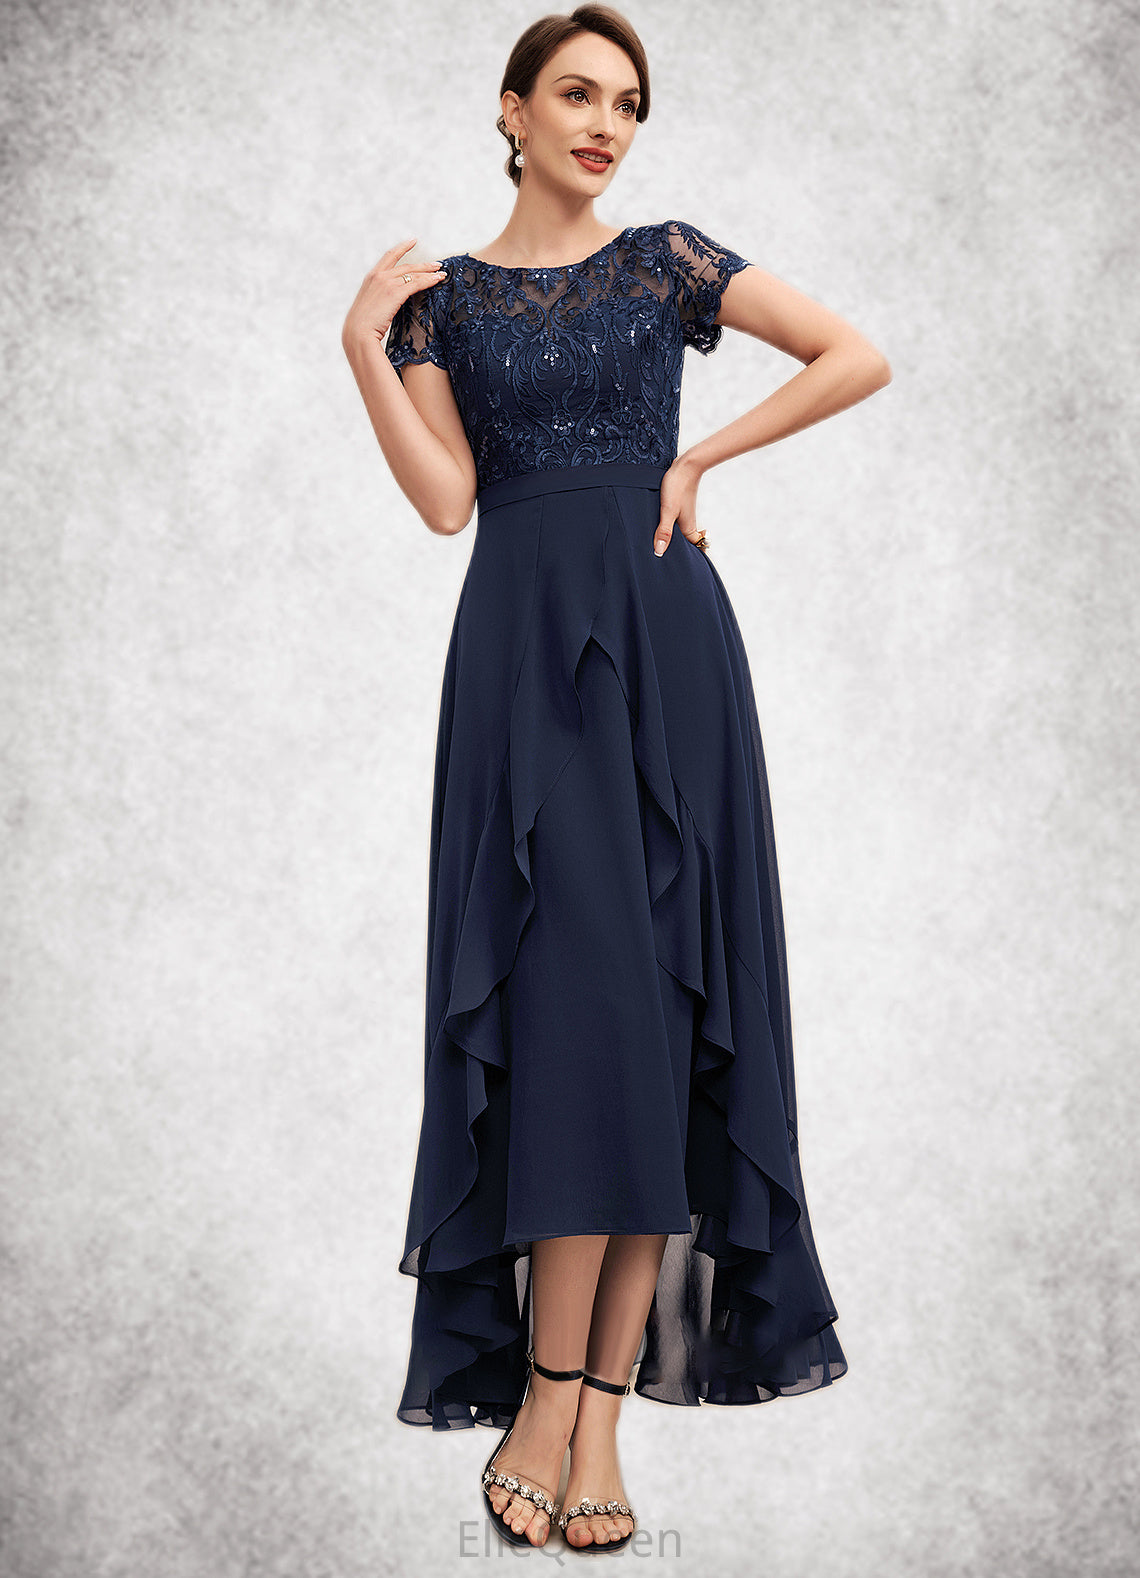 Amari A-Line Scoop Neck Asymmetrical Chiffon Lace Mother of the Bride Dress With Sequins Bow(s) Cascading Ruffles DG126P0014530